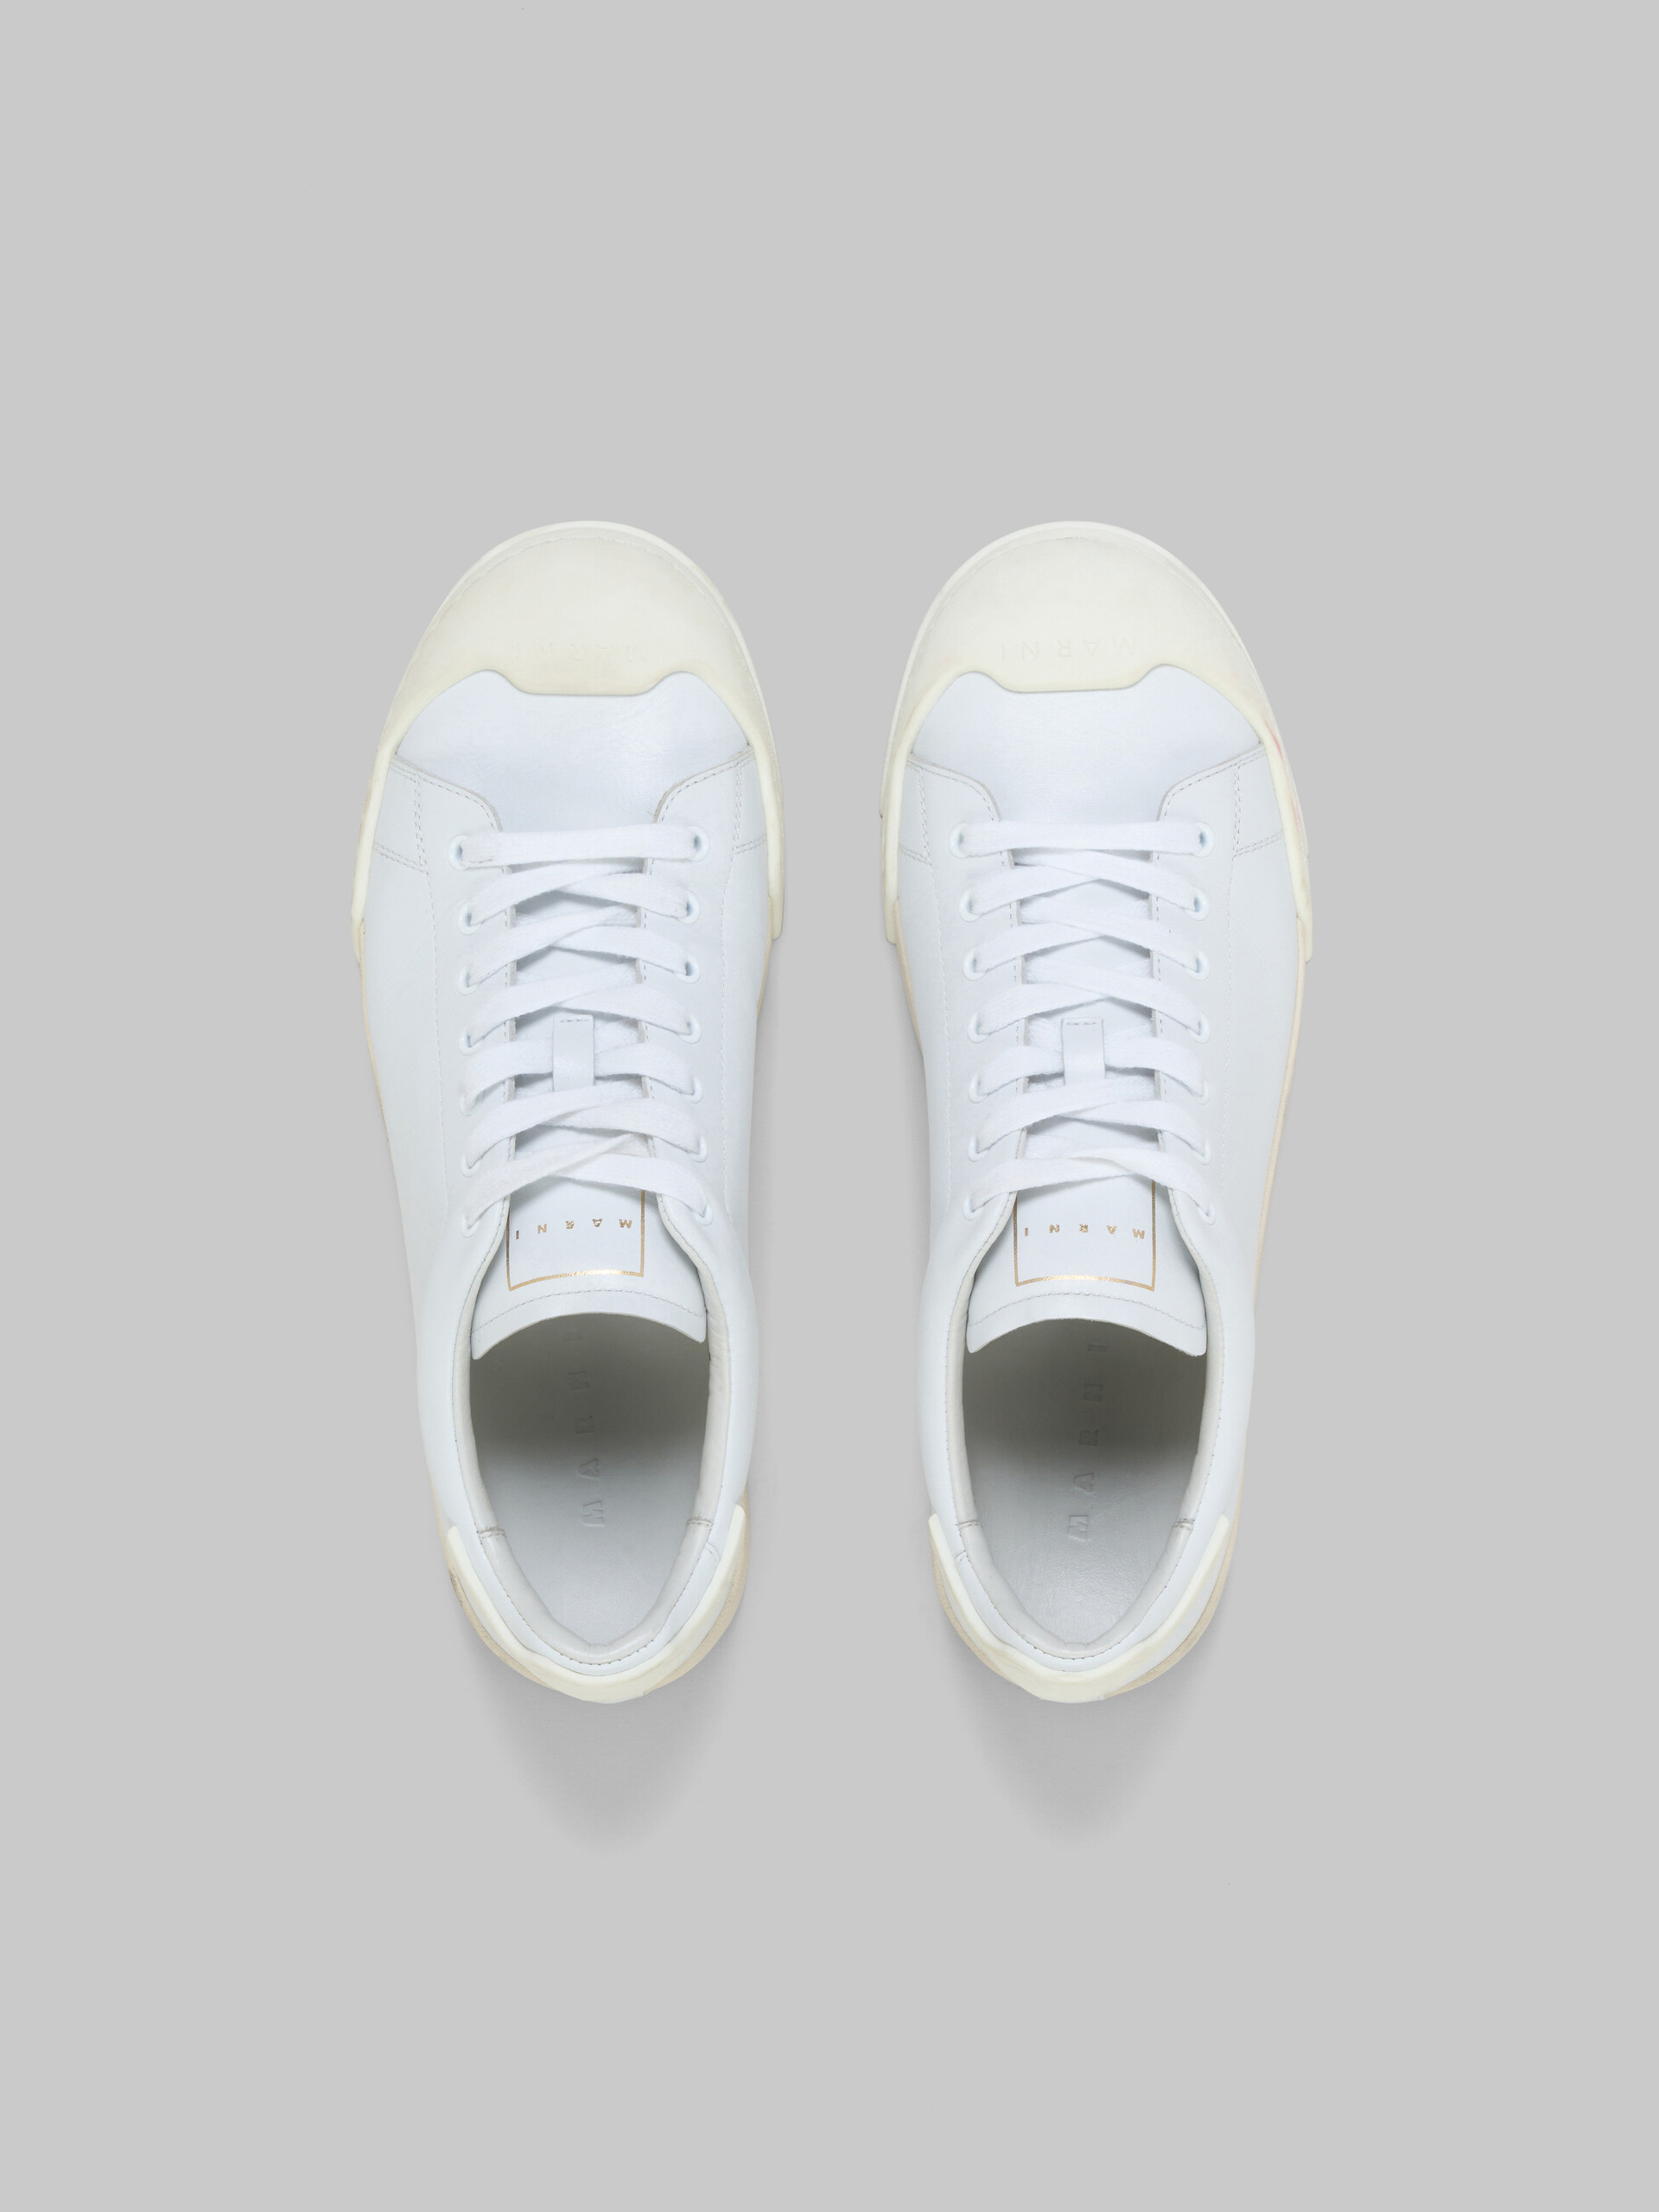 Dada Bumper sneaker in white and yellow leather - Sneakers - Image 4